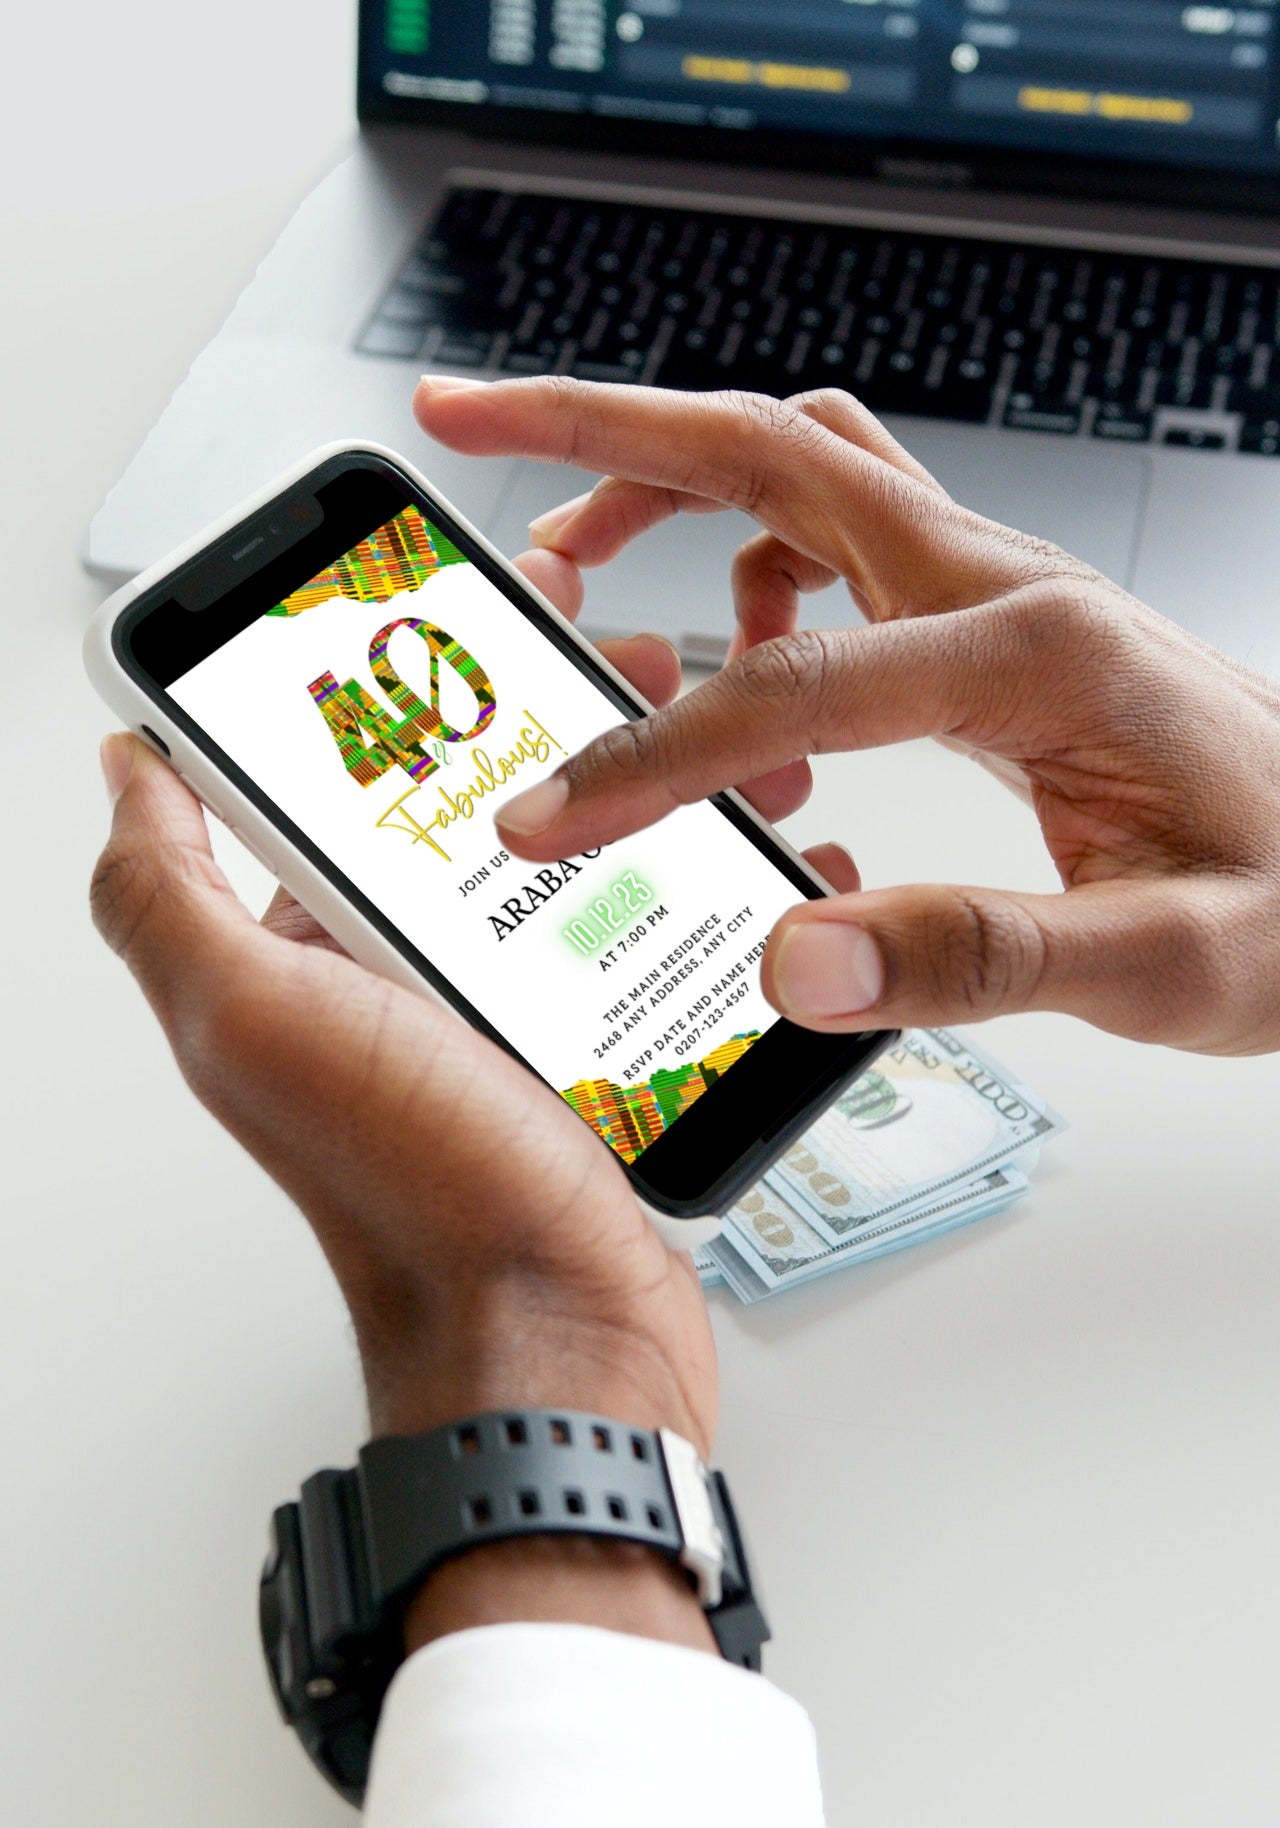 Person holding a smartphone displaying the White Green Yellow Kente | 40 & Fabulous Party Evite, ready for customization via Canva.